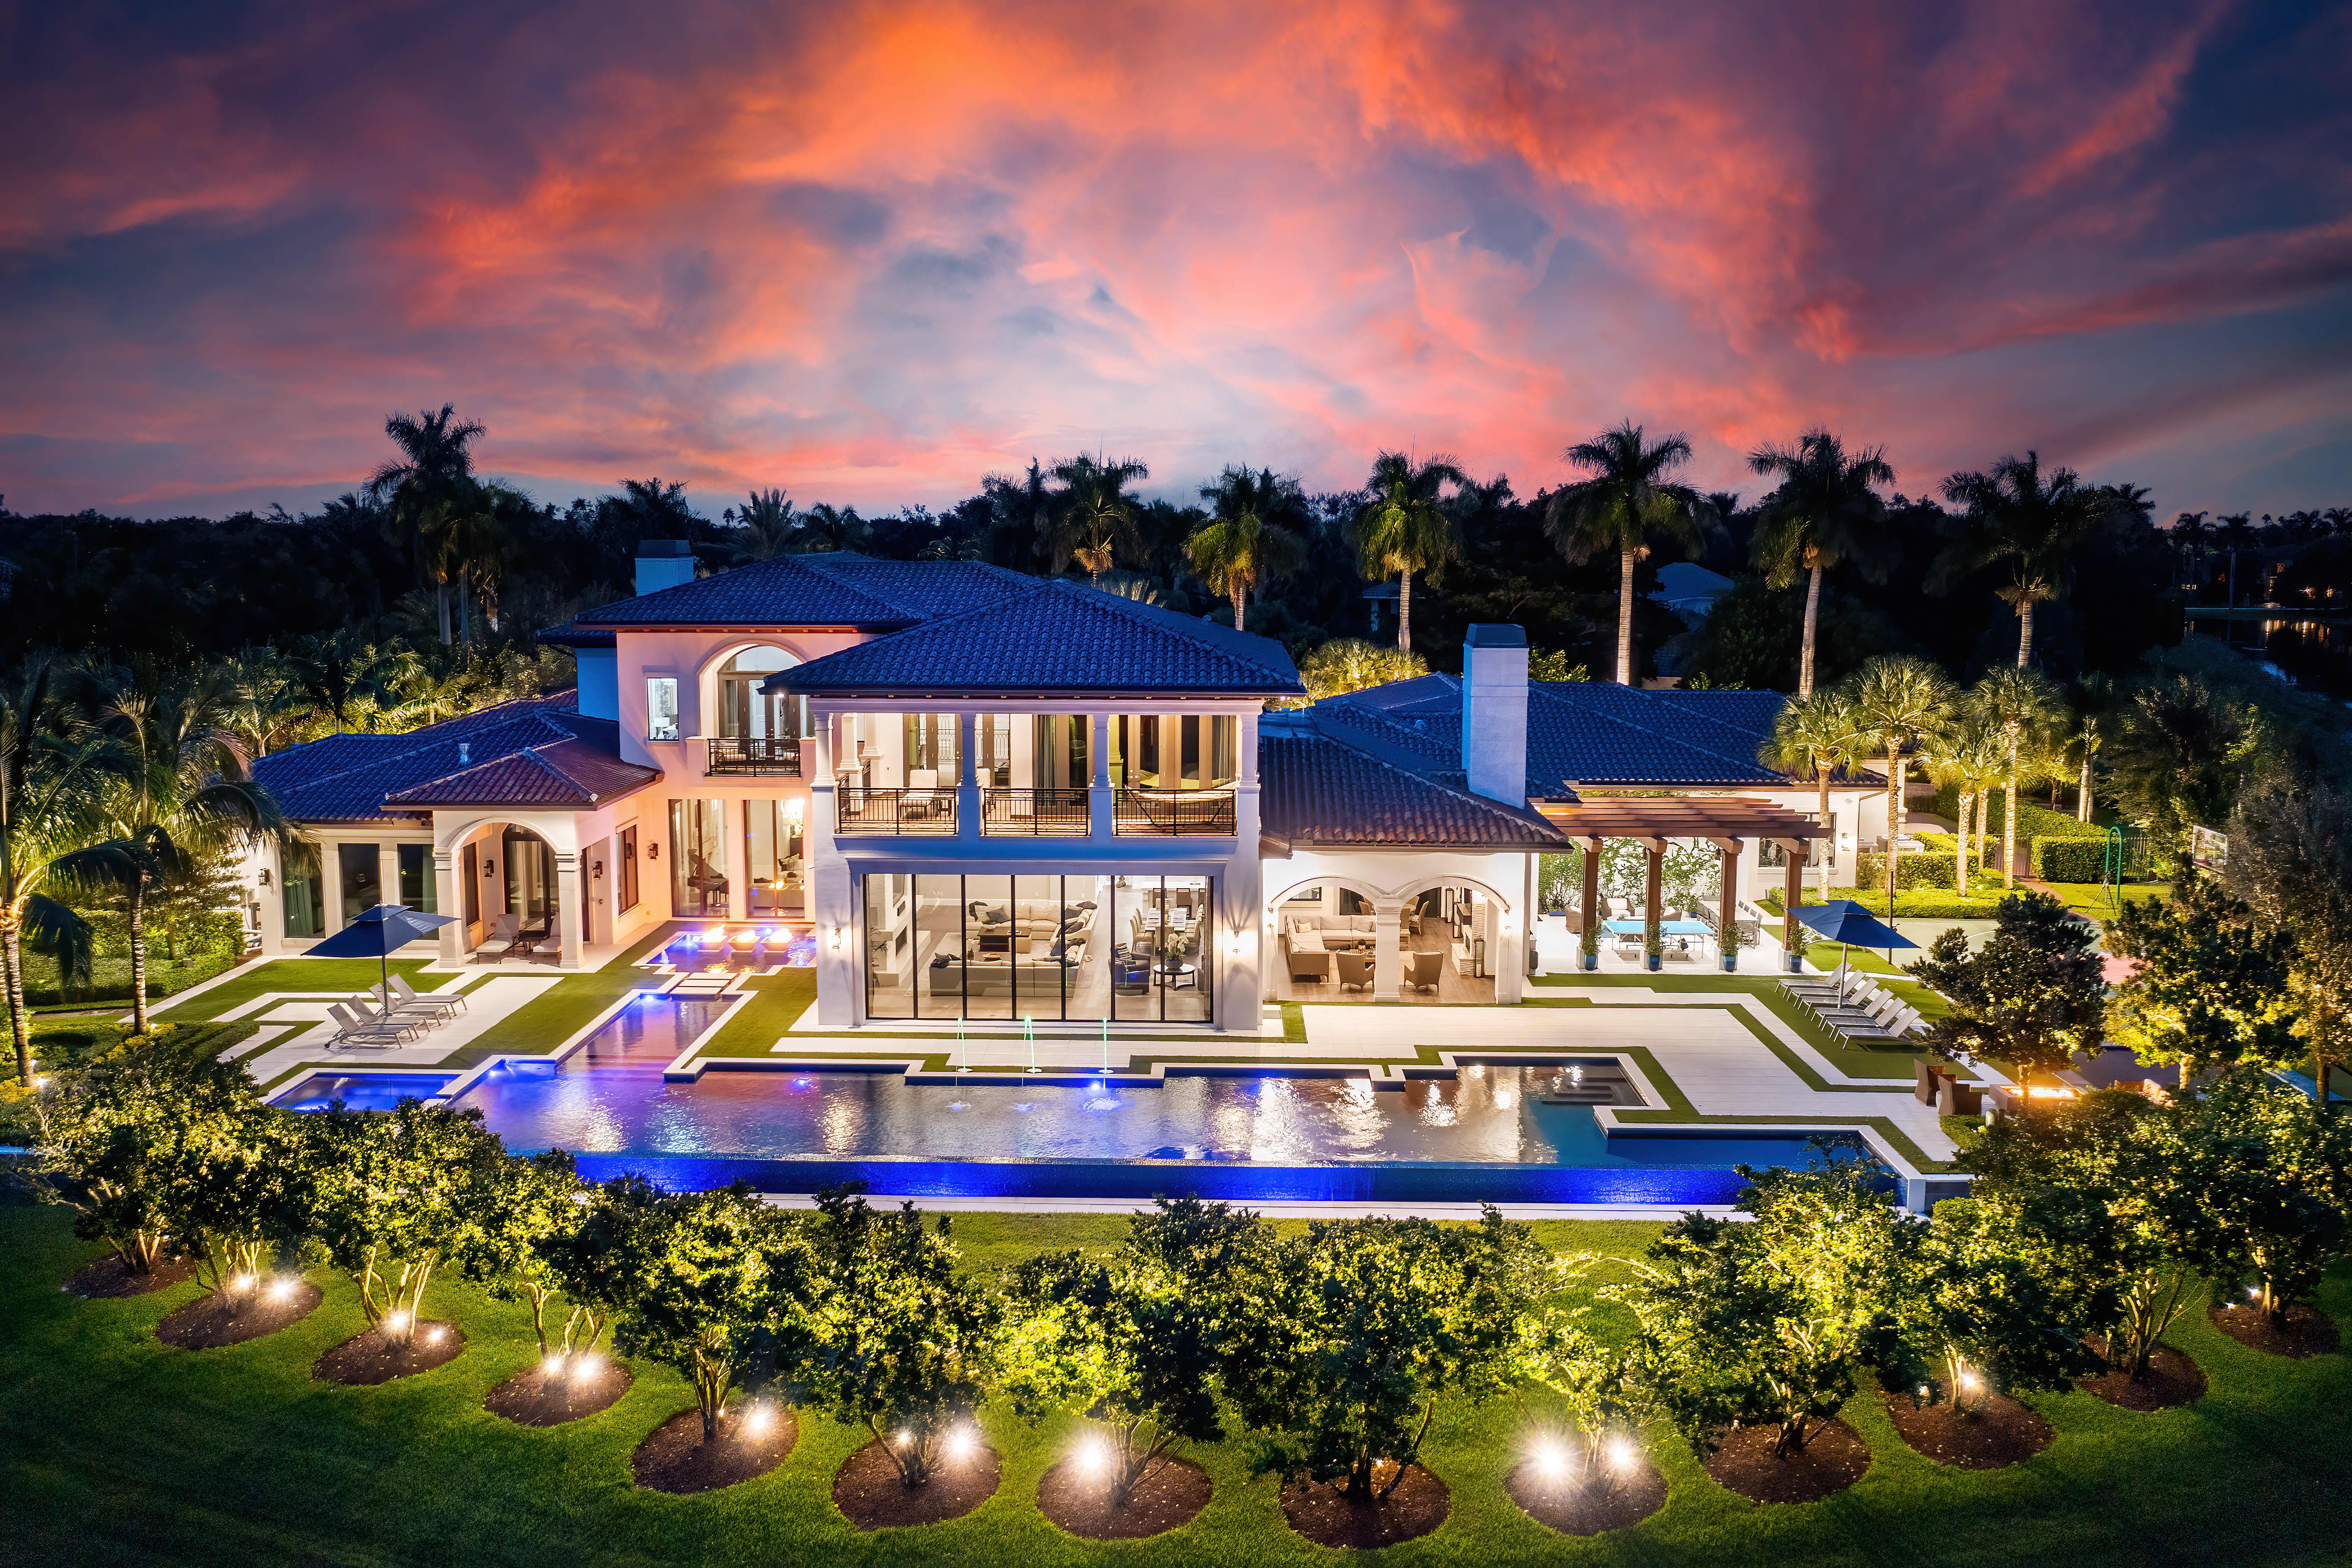 Tour this mansion near the Everglades that could break a Florida real estate record